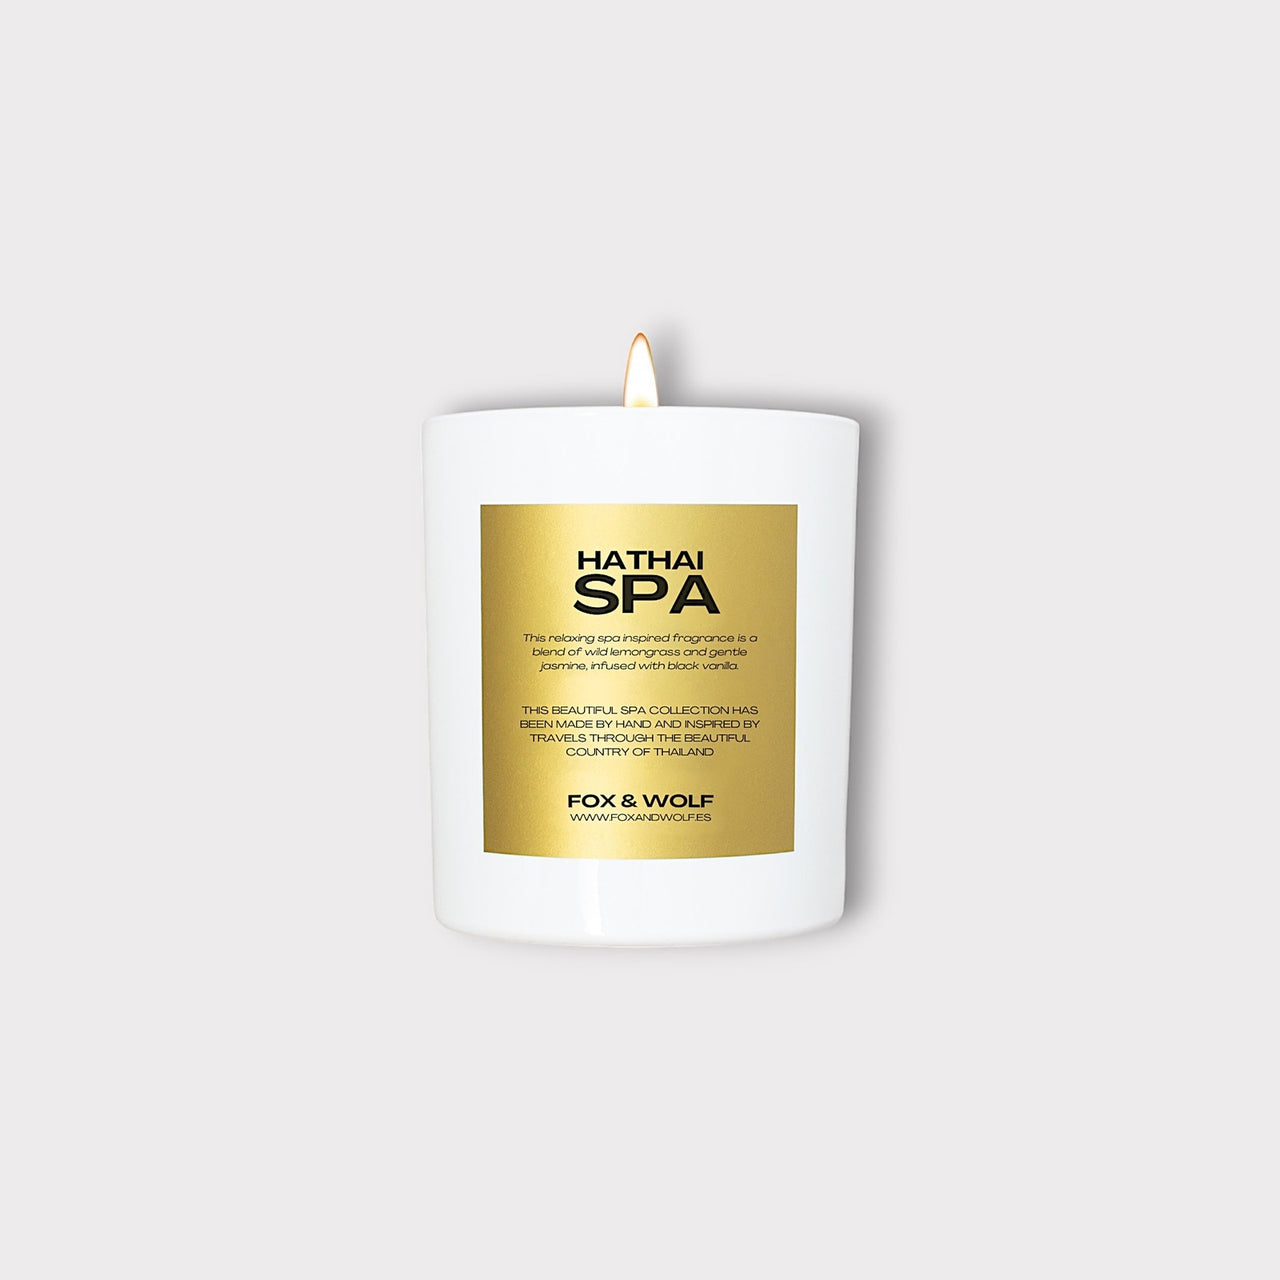 300G HATHAI SPA SCENTED CANDLE